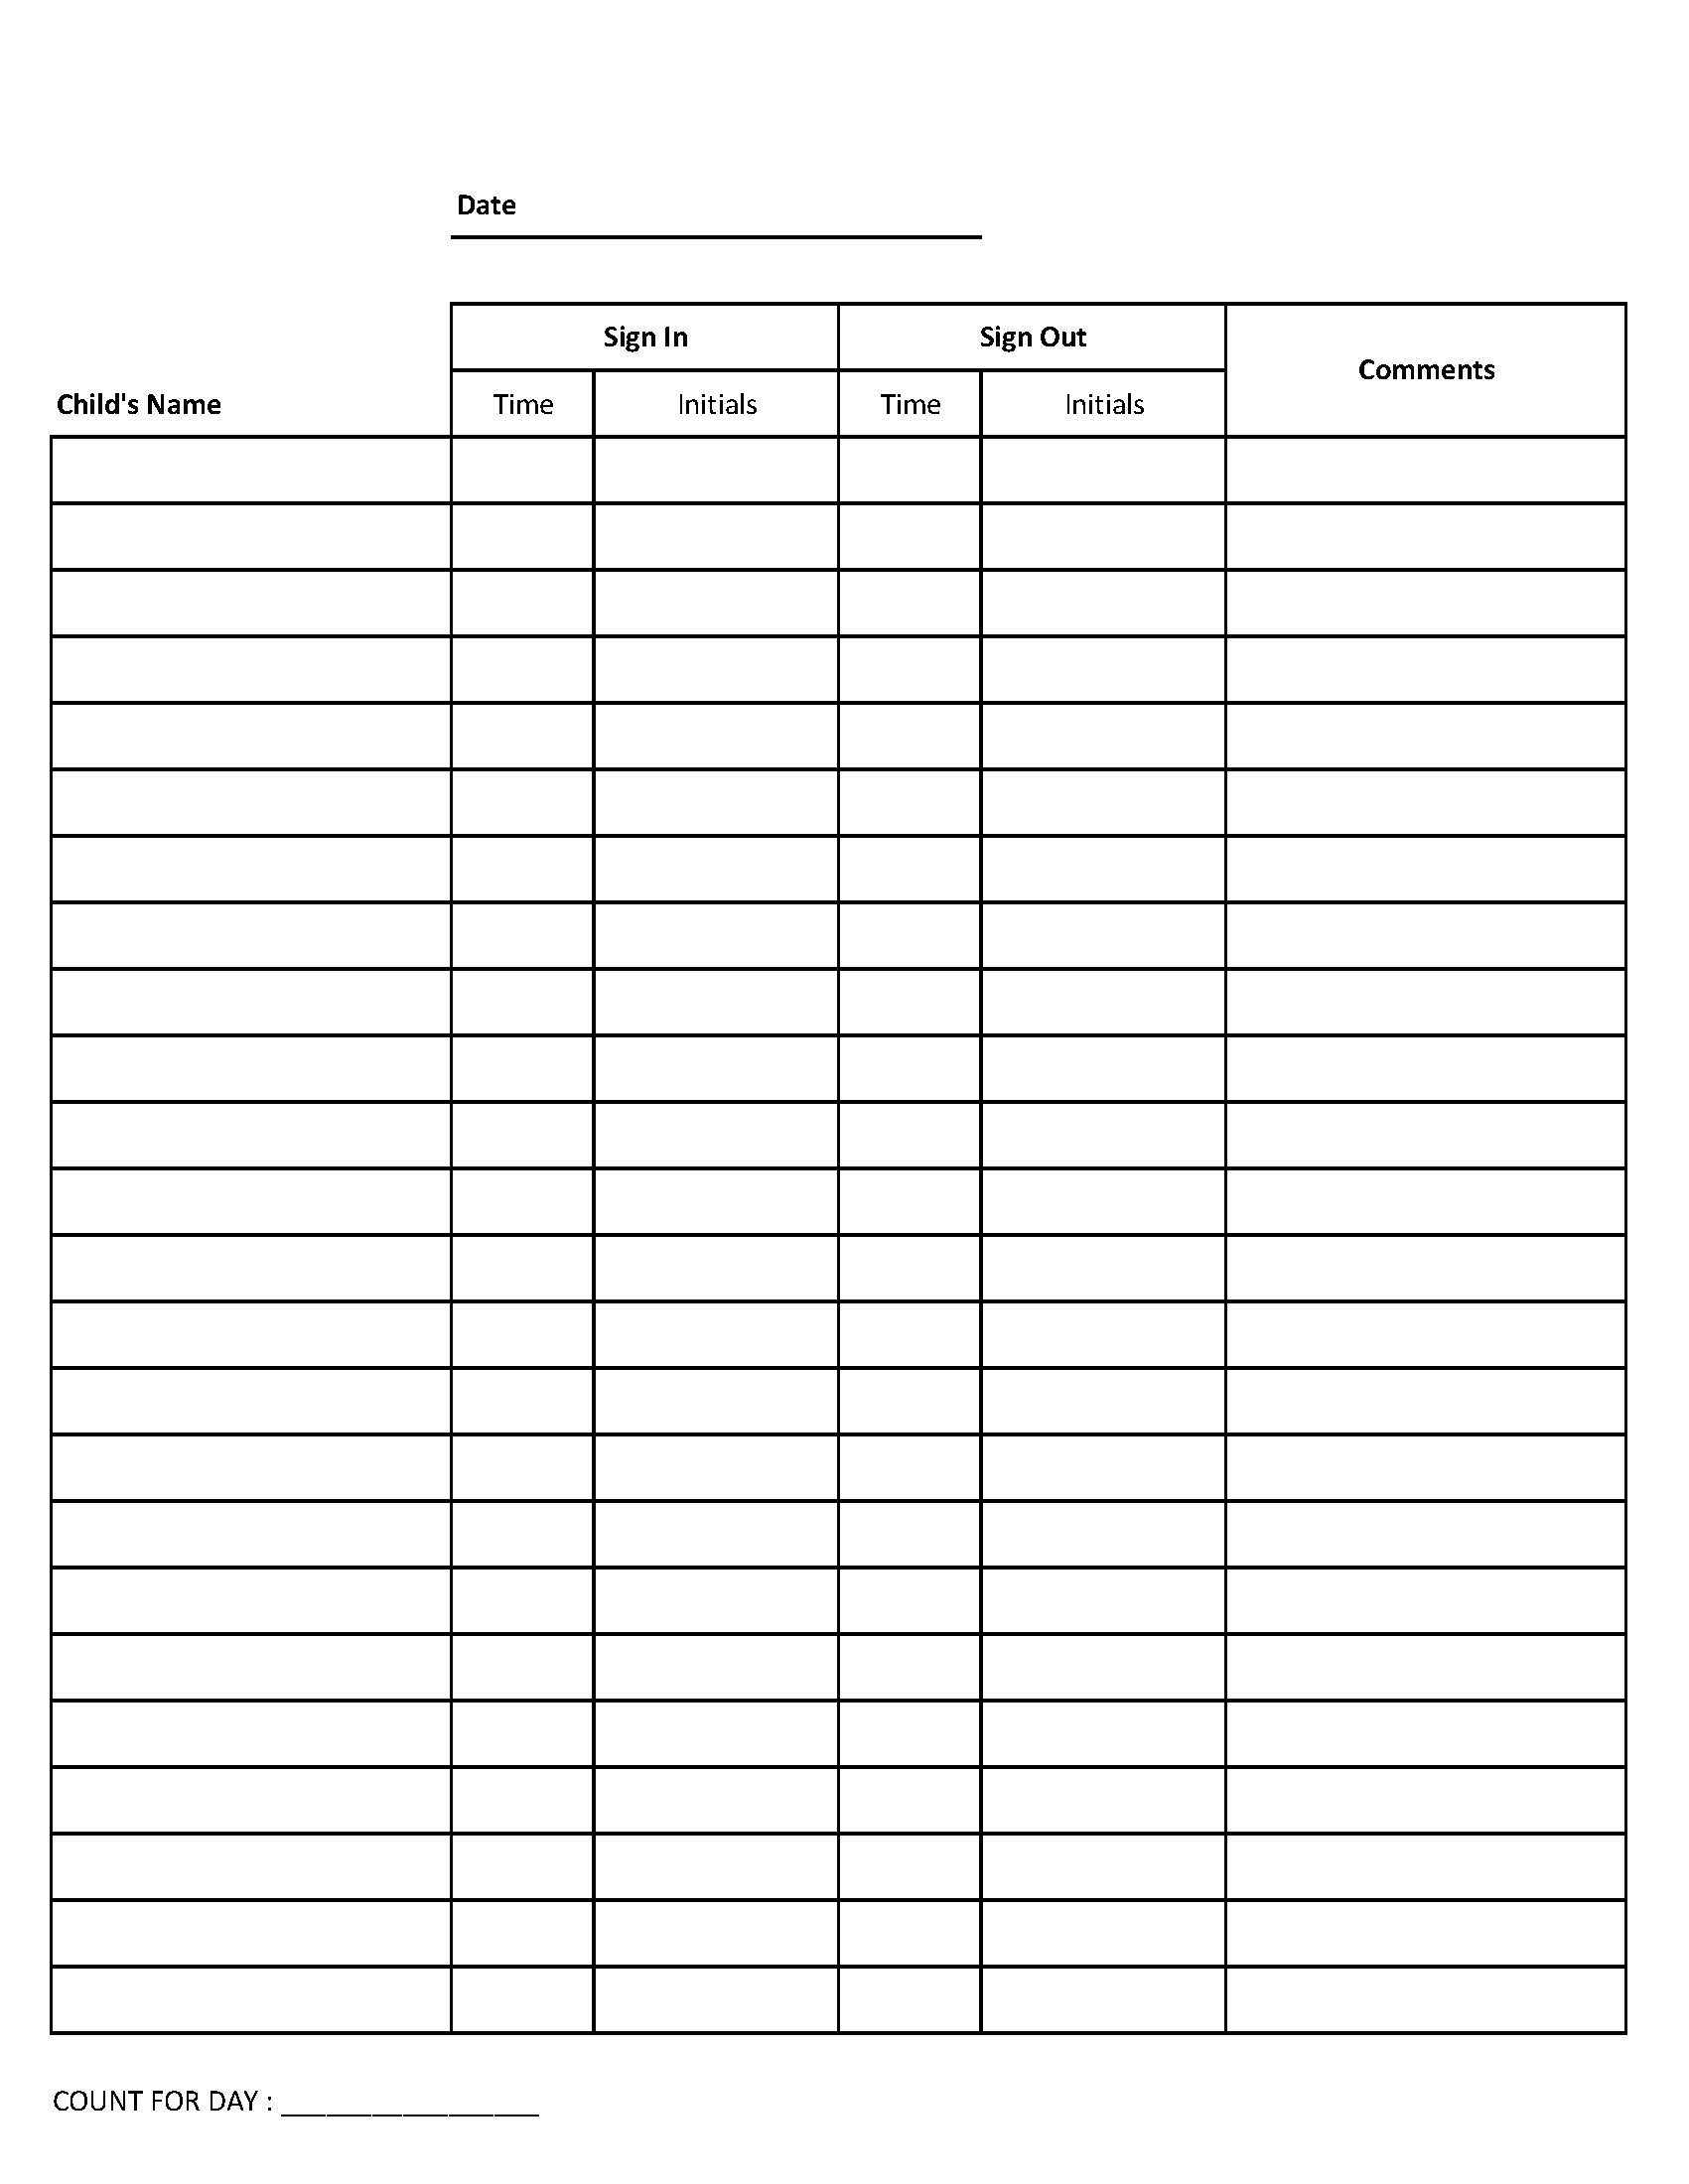 Mileage Logs, Forms & Checklists for Child Care Providers